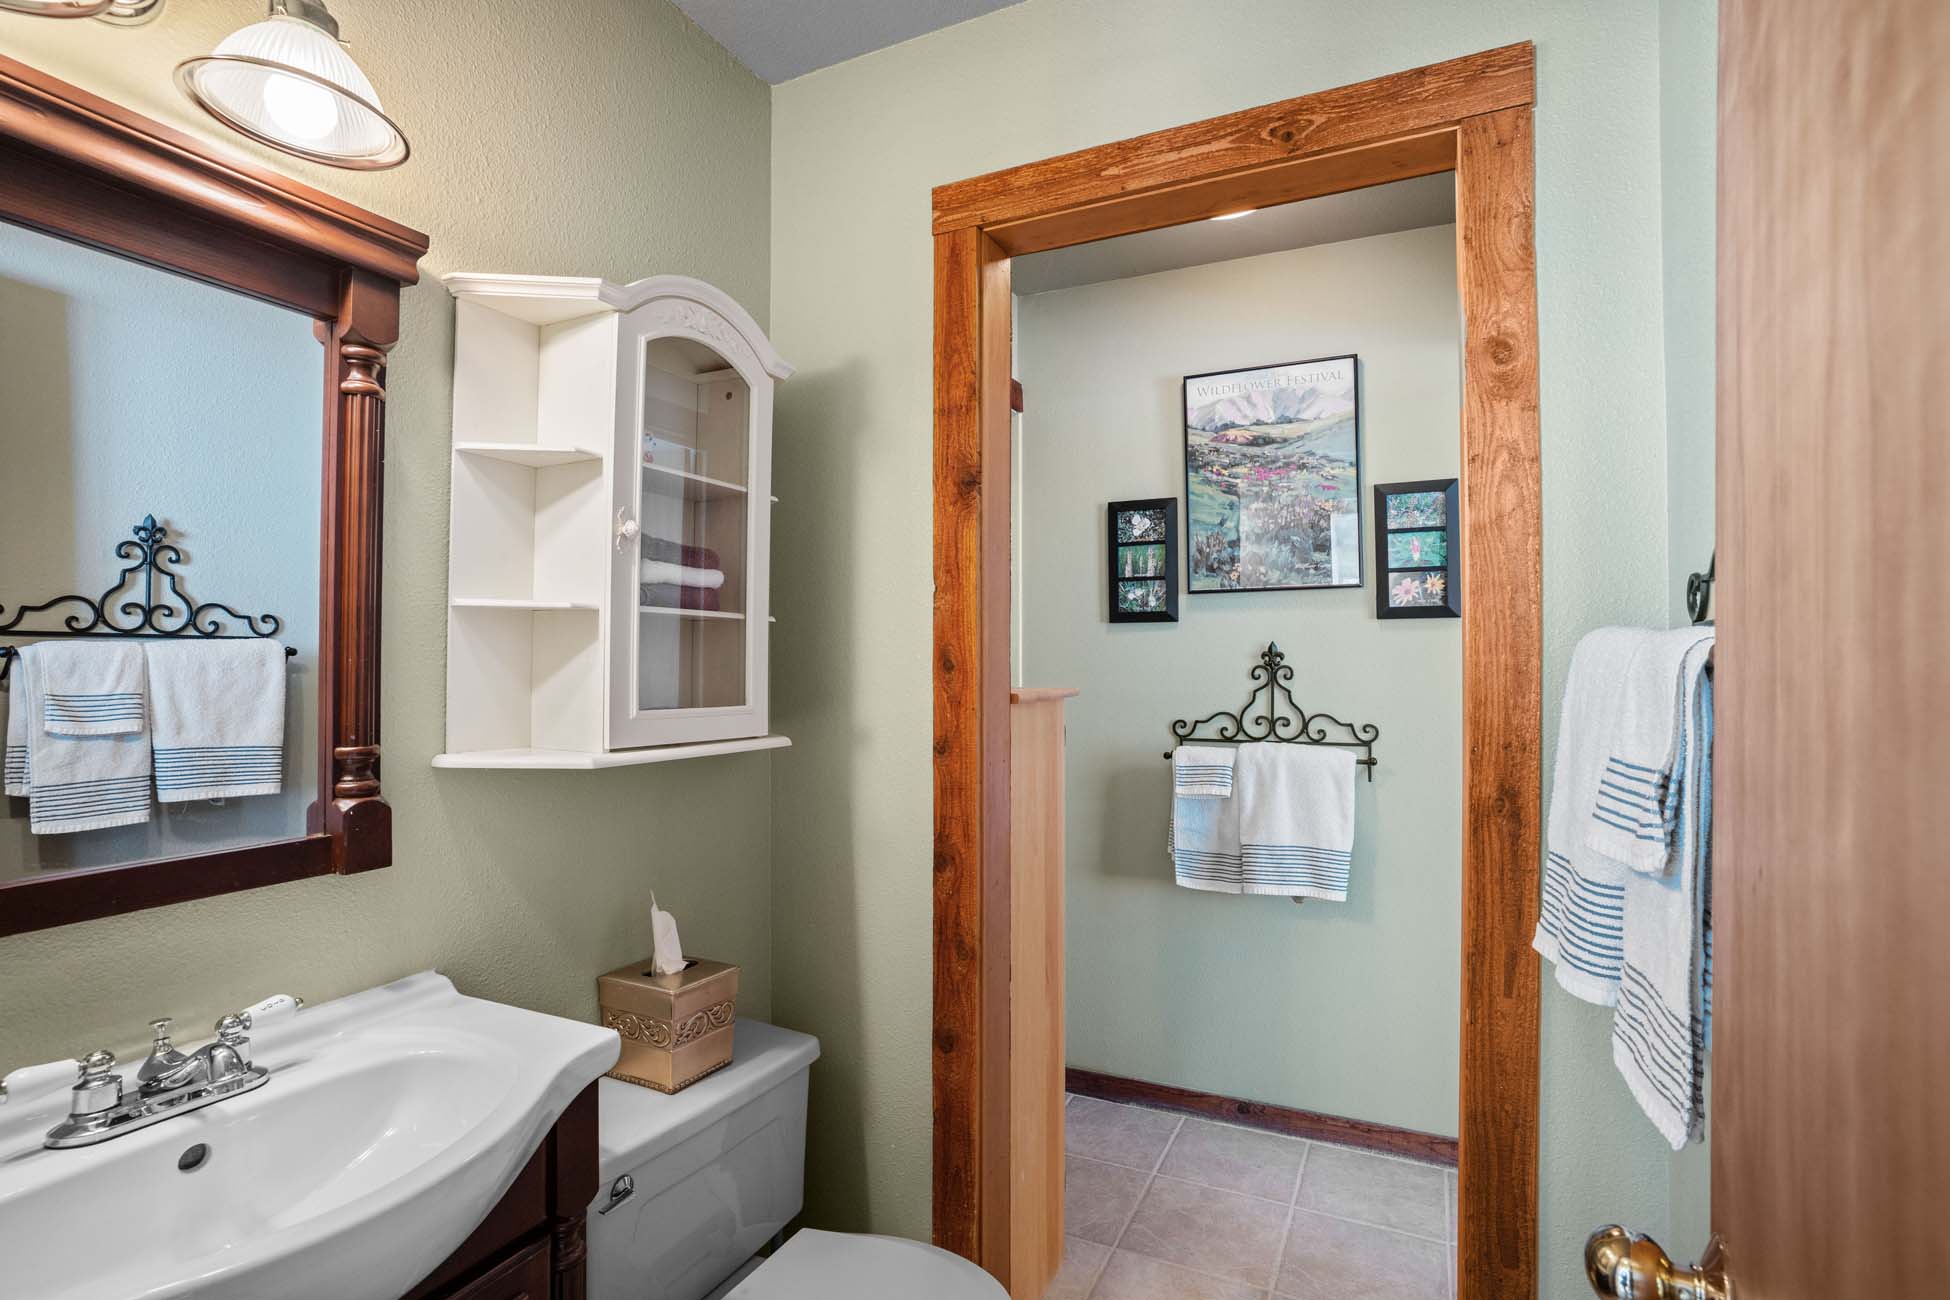 49 Powderview Drive, Crested Butte Colorado - primary bathroom